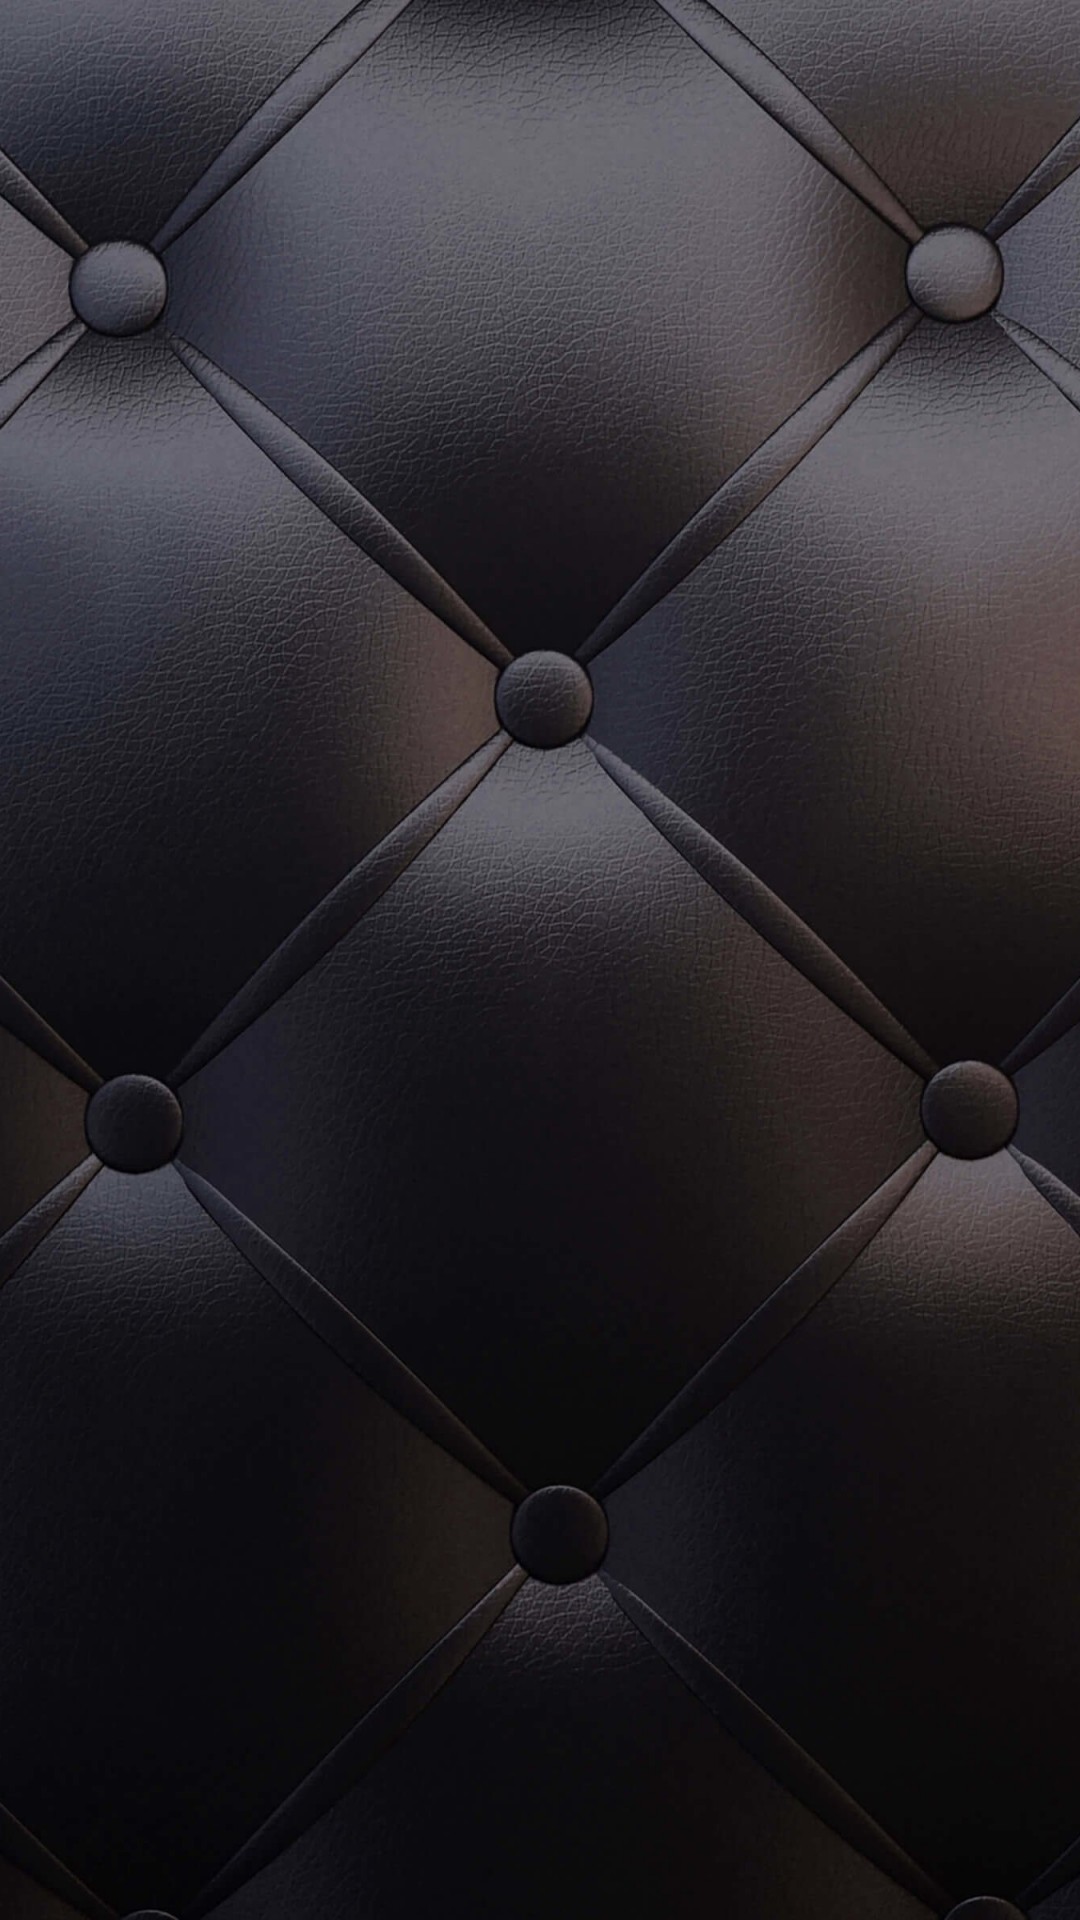 Black Leather Vintage Sofa Wallpaper for SONY Xperia Z2